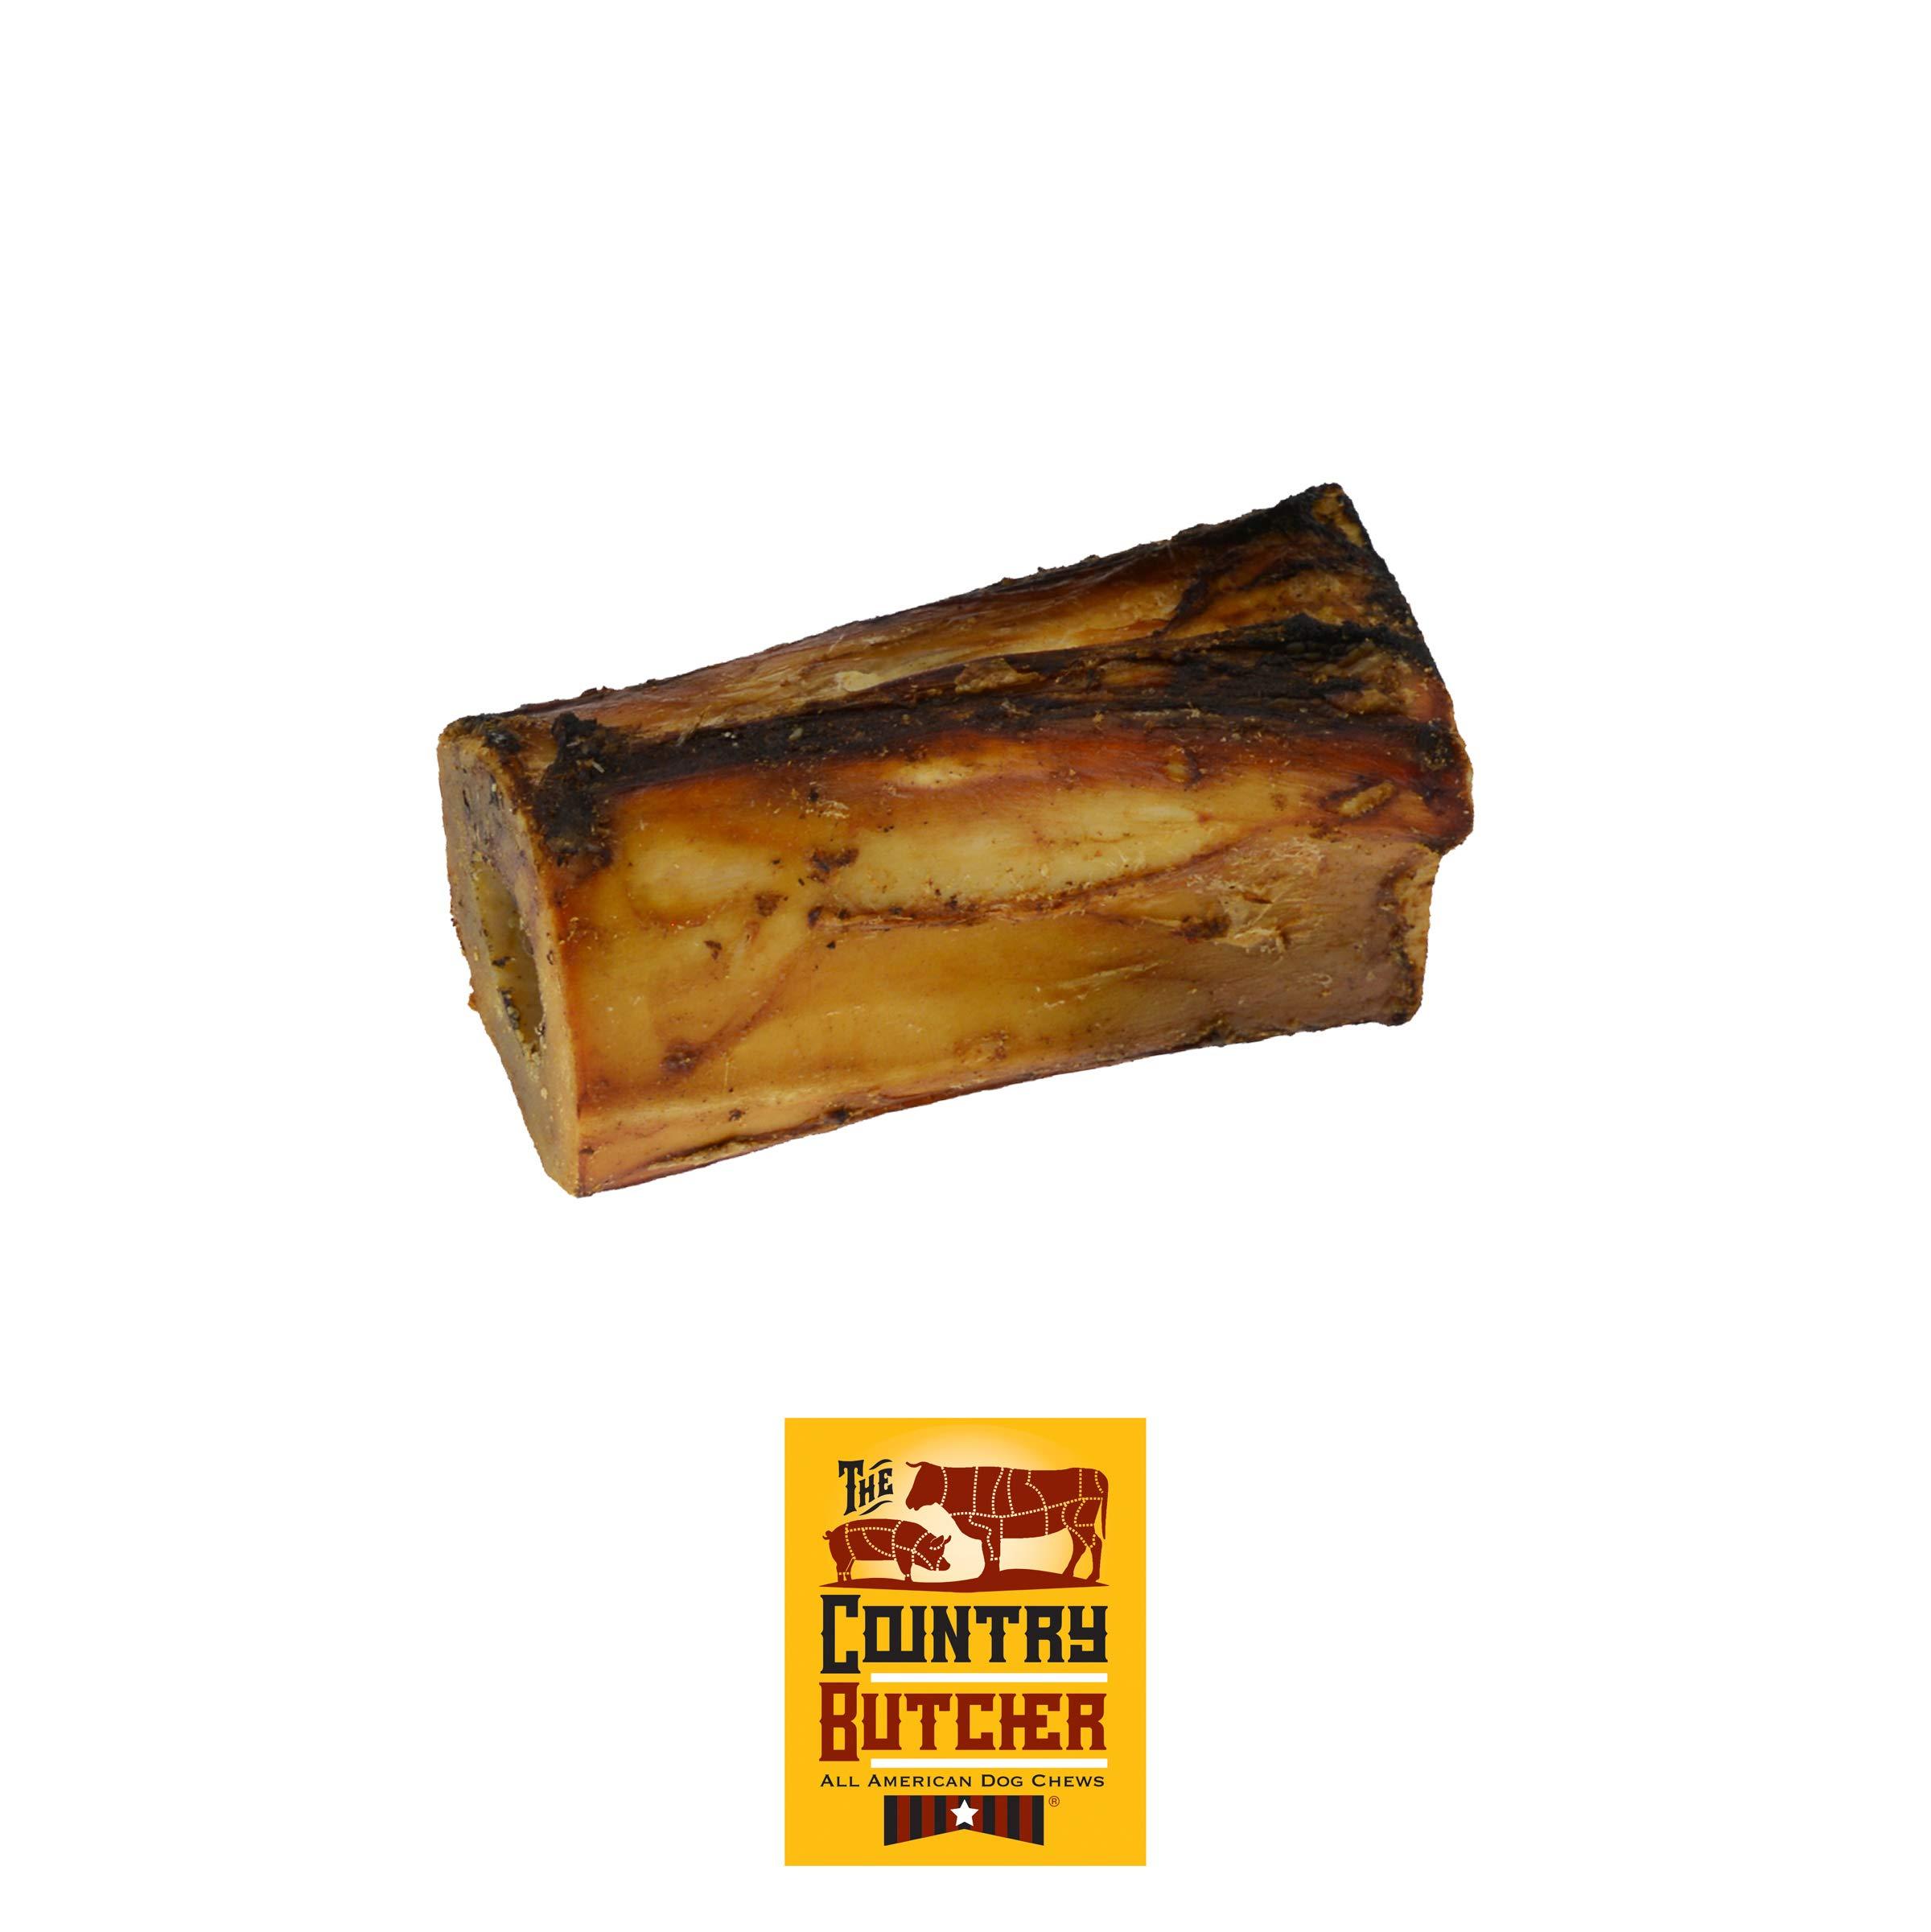 The Country Butcher 4 Beef Center Dog Bones with Marrow & Meaty Pieces, Moderate to Aggressive Chewers, Made in USA, 3 Count